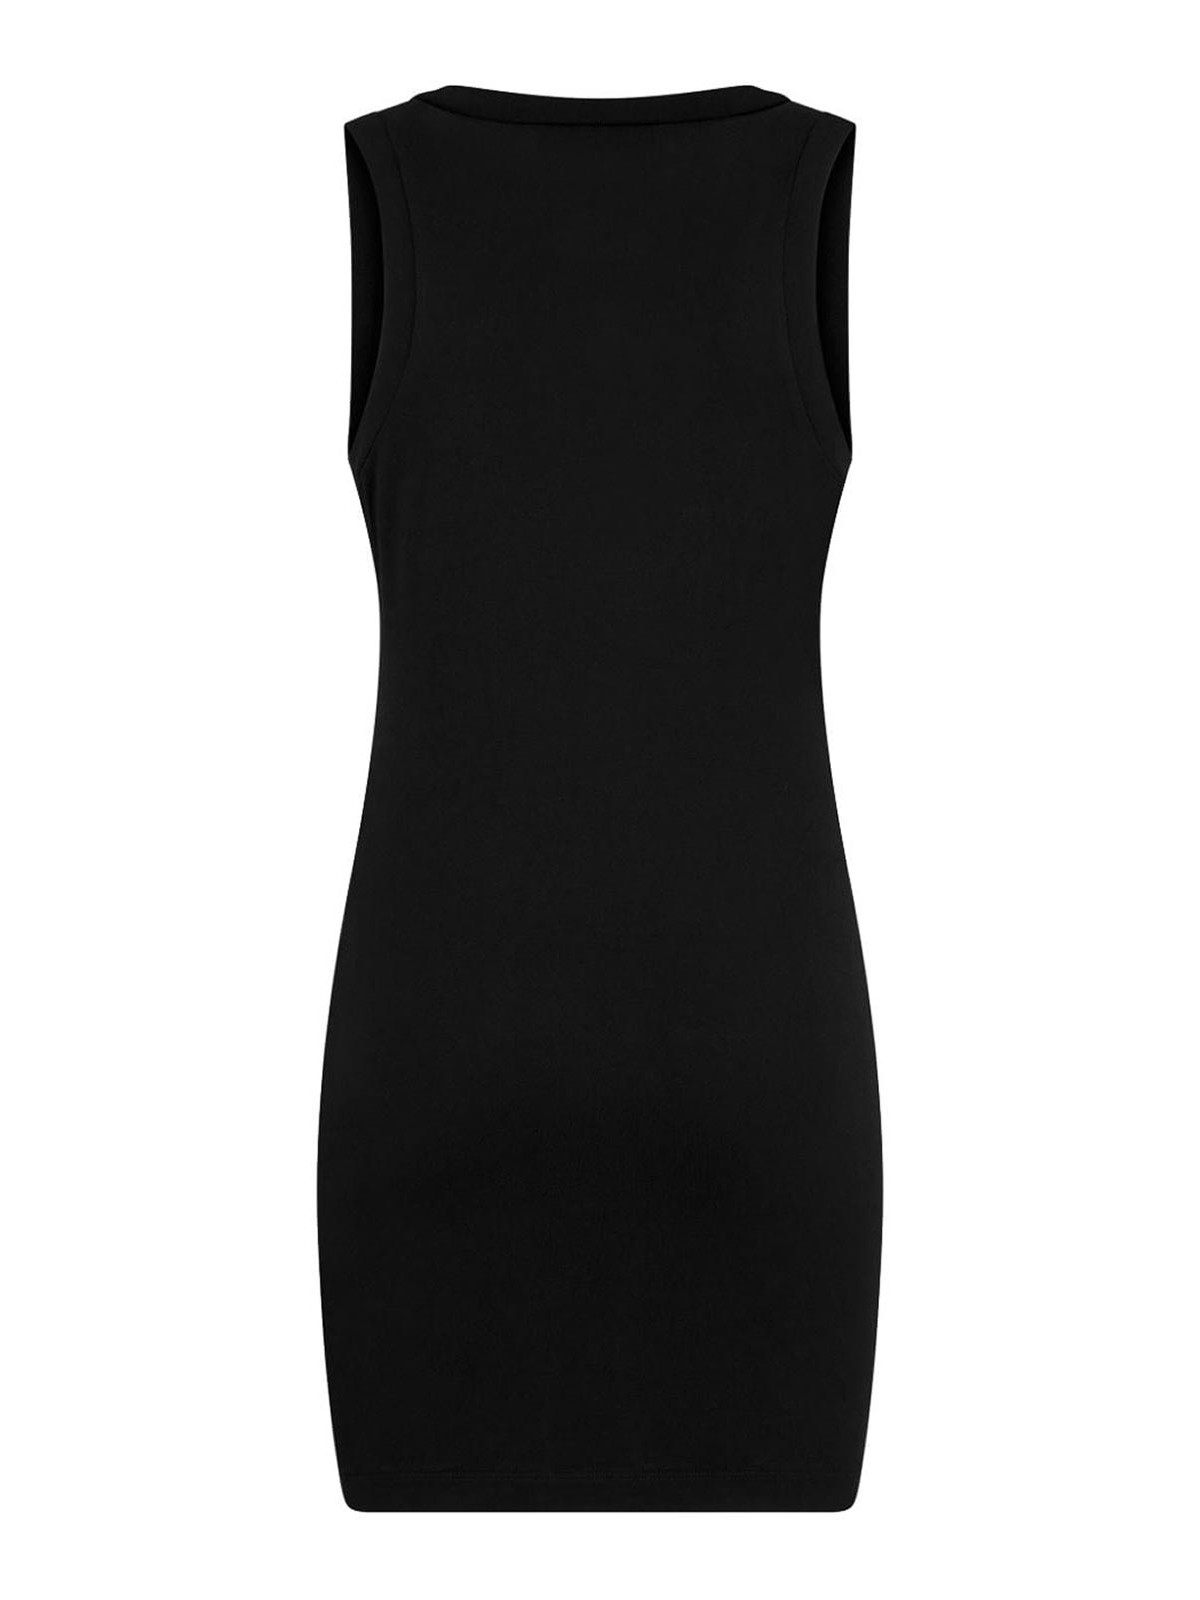 Shop Dsquared2 Dress With Heart In Black